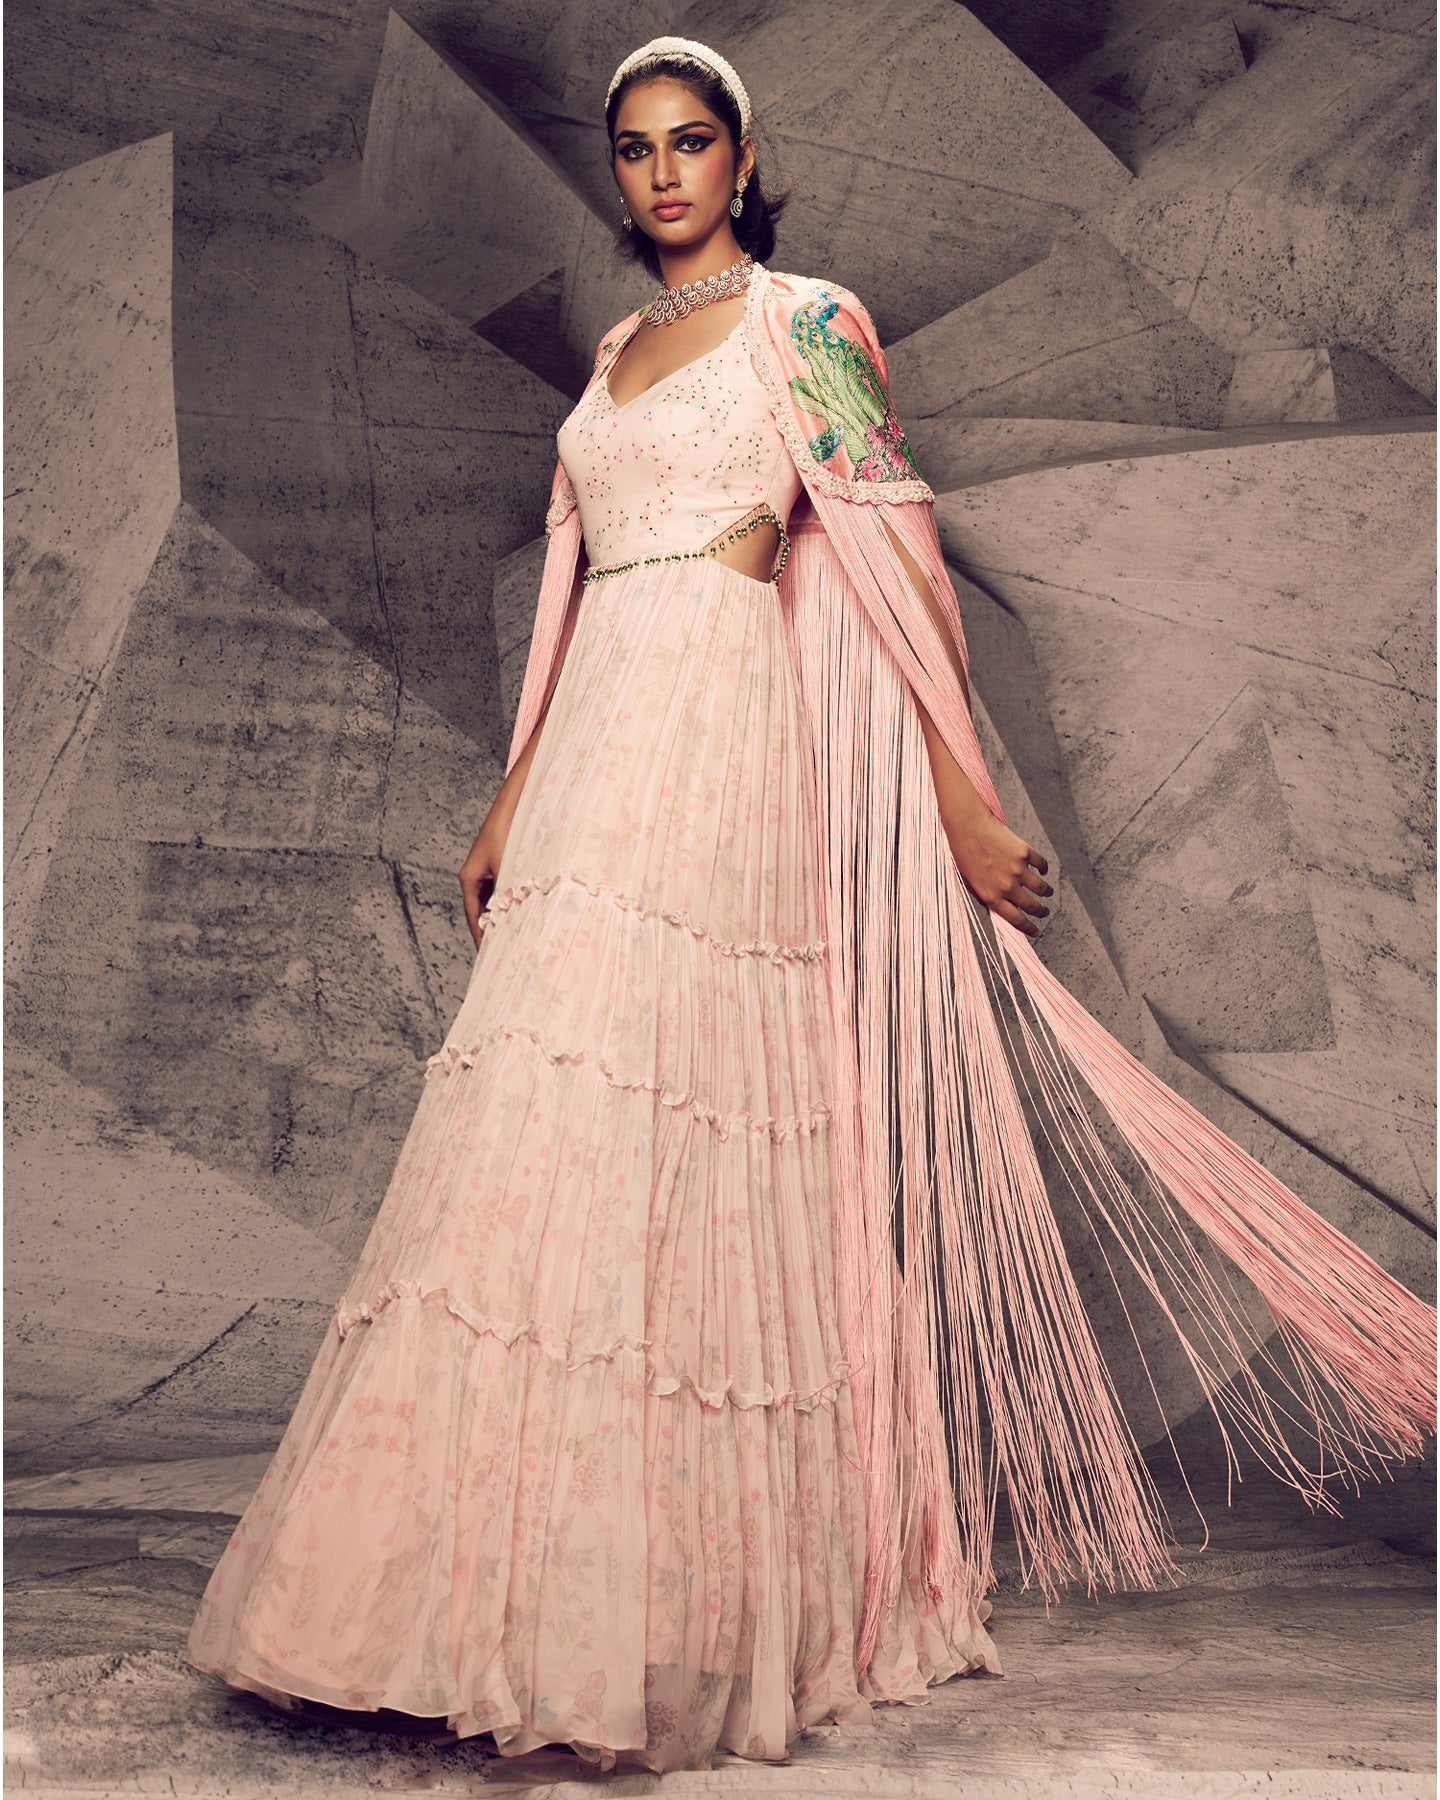 Radiating in the soft hues of pink, this georgette anarkali with delicate tassels and a statement fringe cape is a vision of feminine grace and timeless beauty.